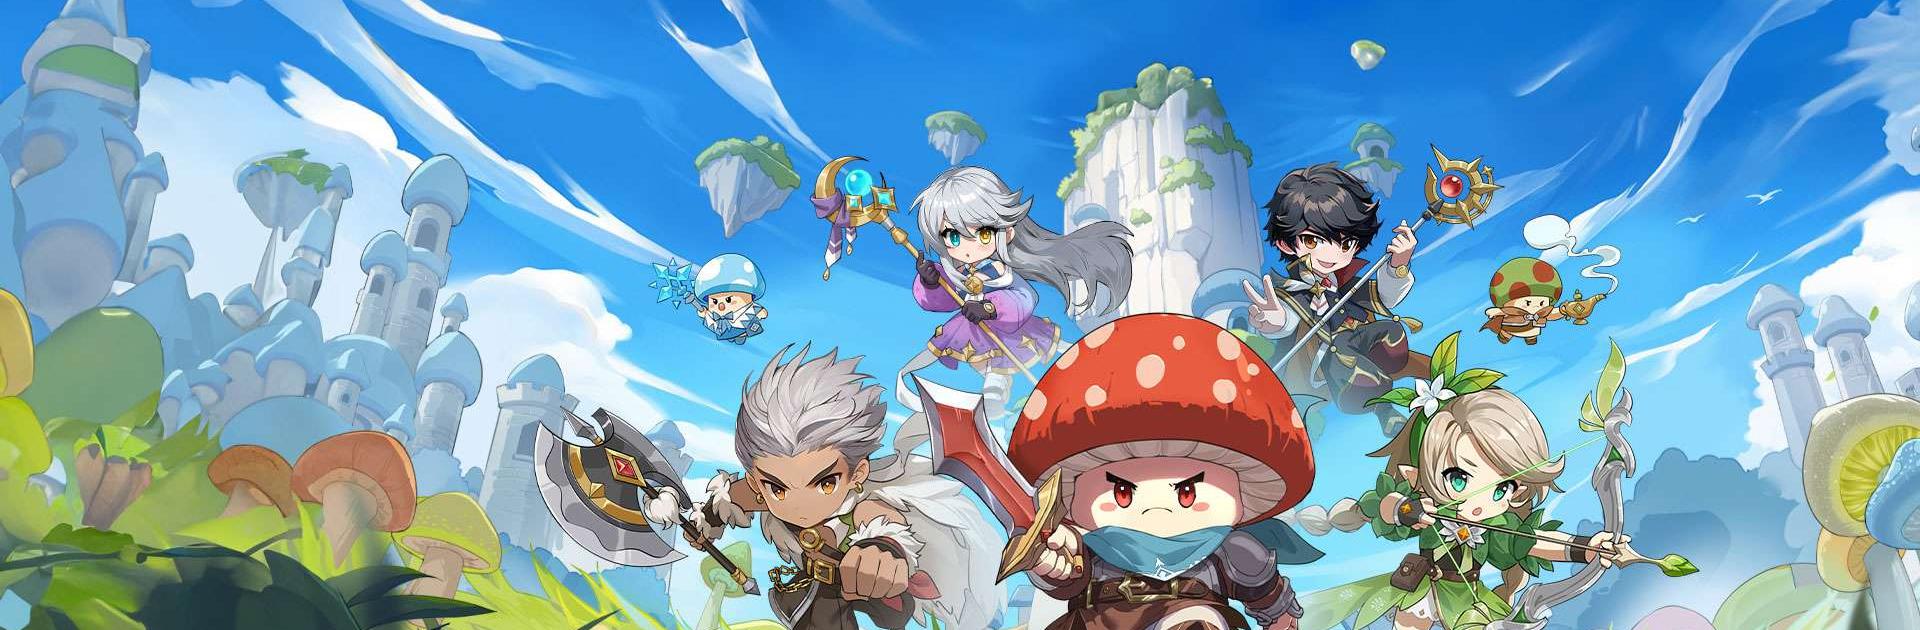 Legend of Mushroom – Guide for the Mage Class